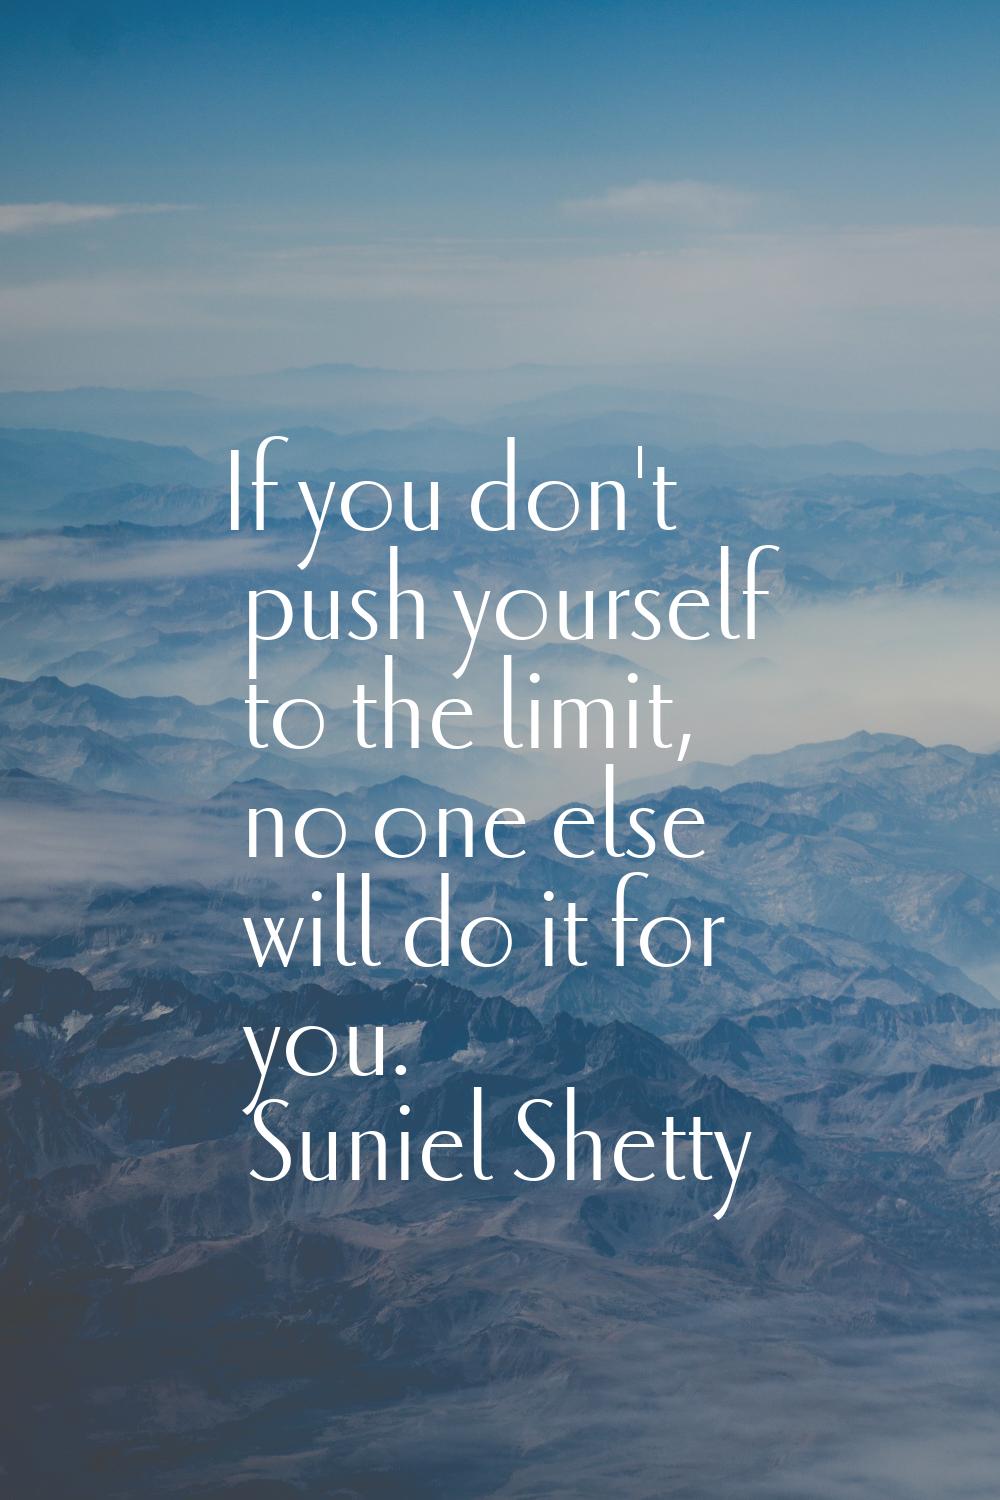 If you don't push yourself to the limit, no one else will do it for you.